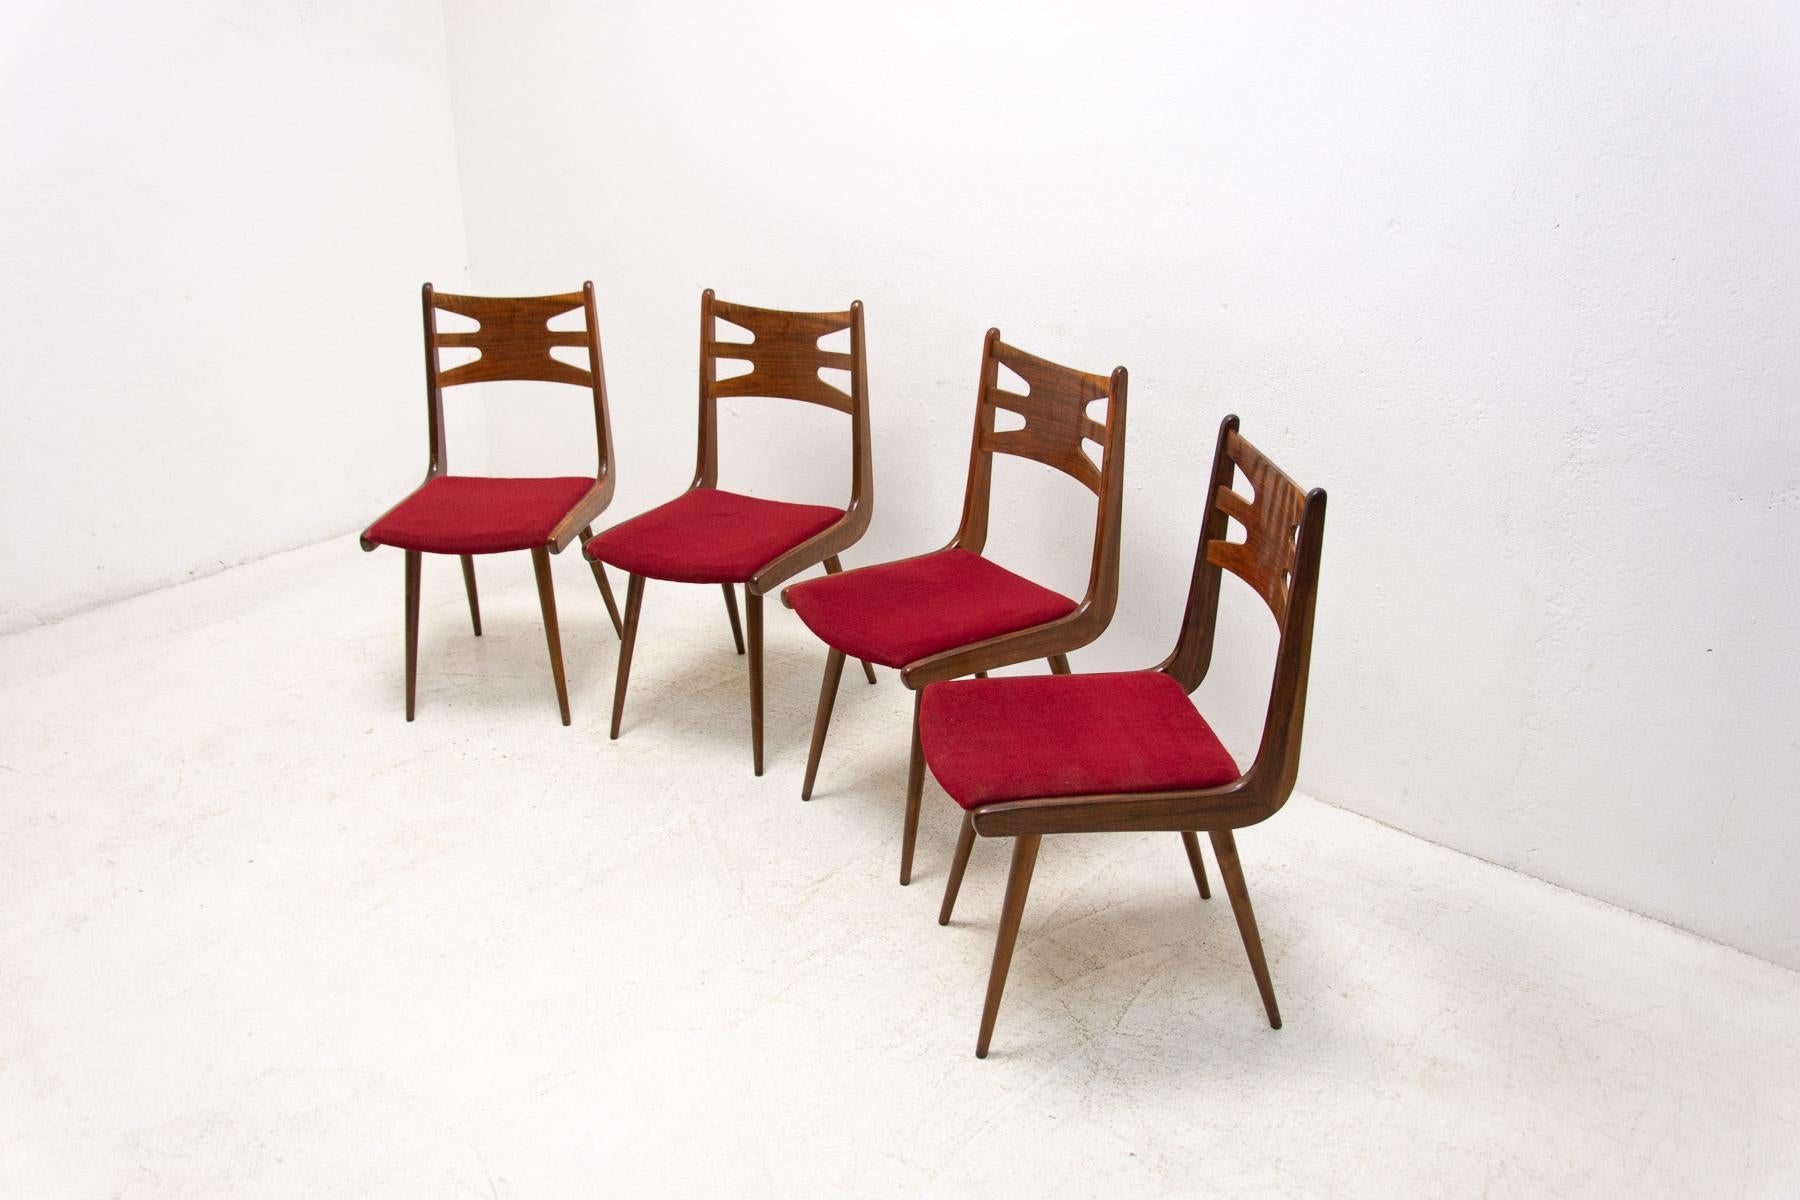 Fabric Set of Upholstered Walnut Dining Chairs, 1970s, Czechoslovakia For Sale